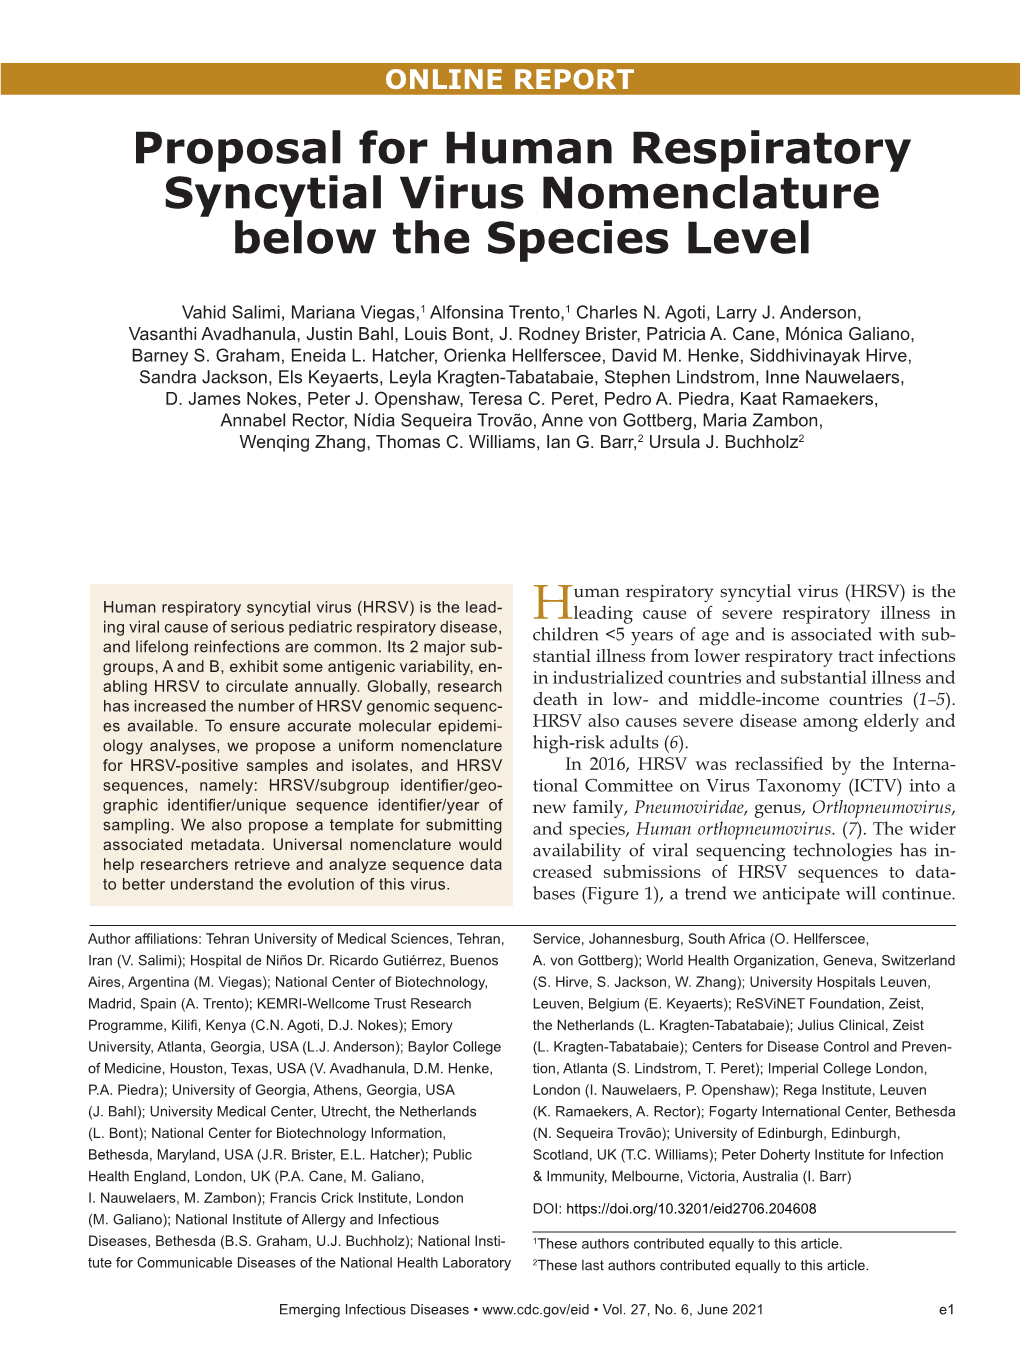 Proposal for Human Respiratory Syncytial Virus Nomenclature Below the Species Level